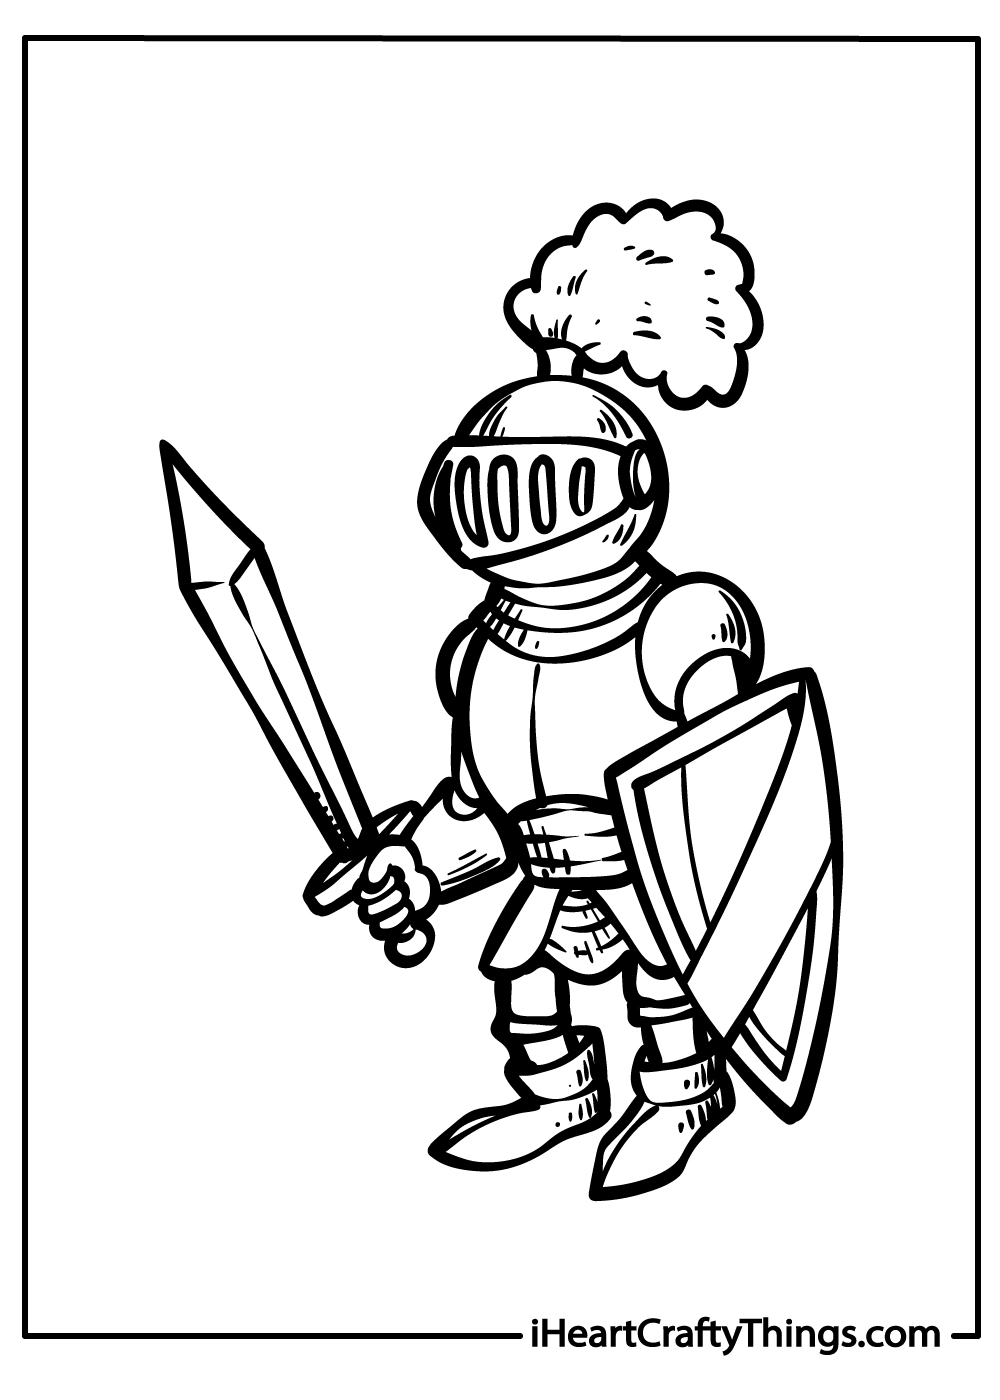 original knight coloring pages